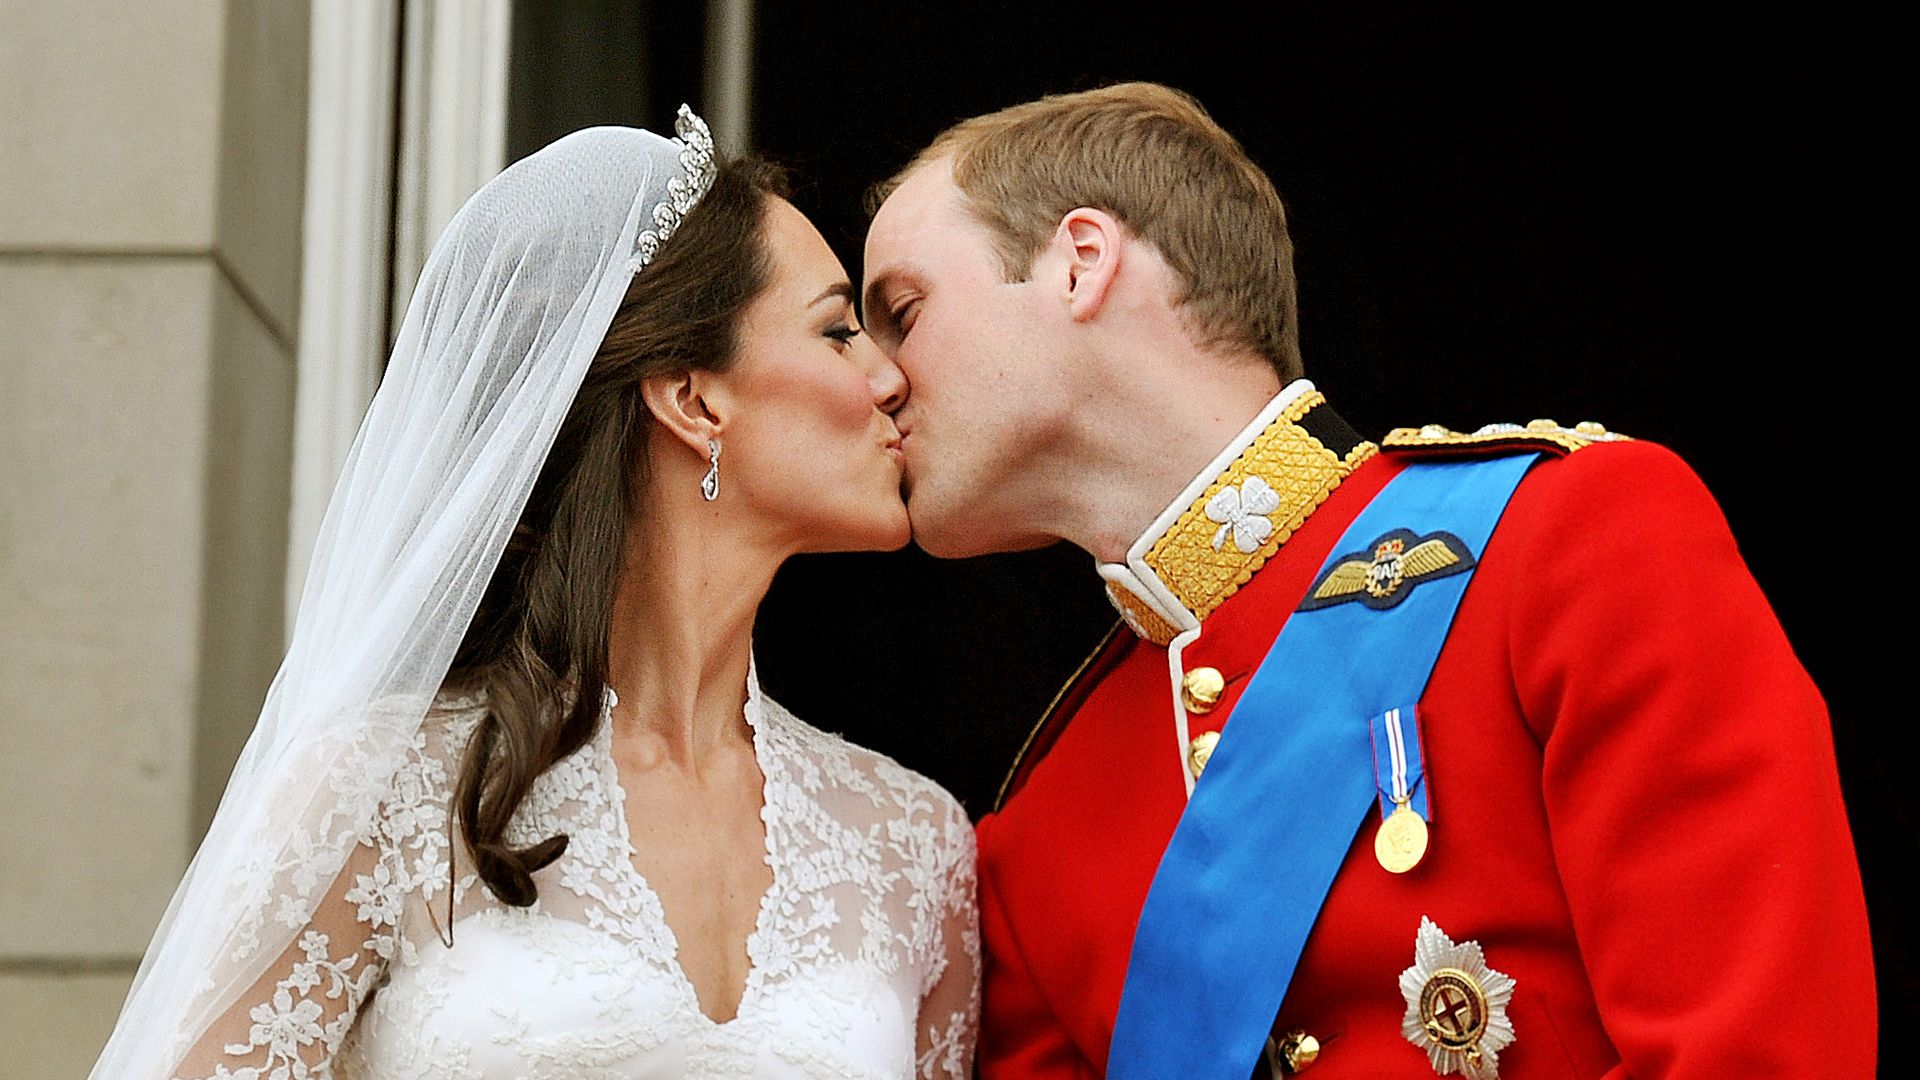 The Prince and Princess of Wales' famous post-wedding kiss occured on the Buckingham Palace balcony